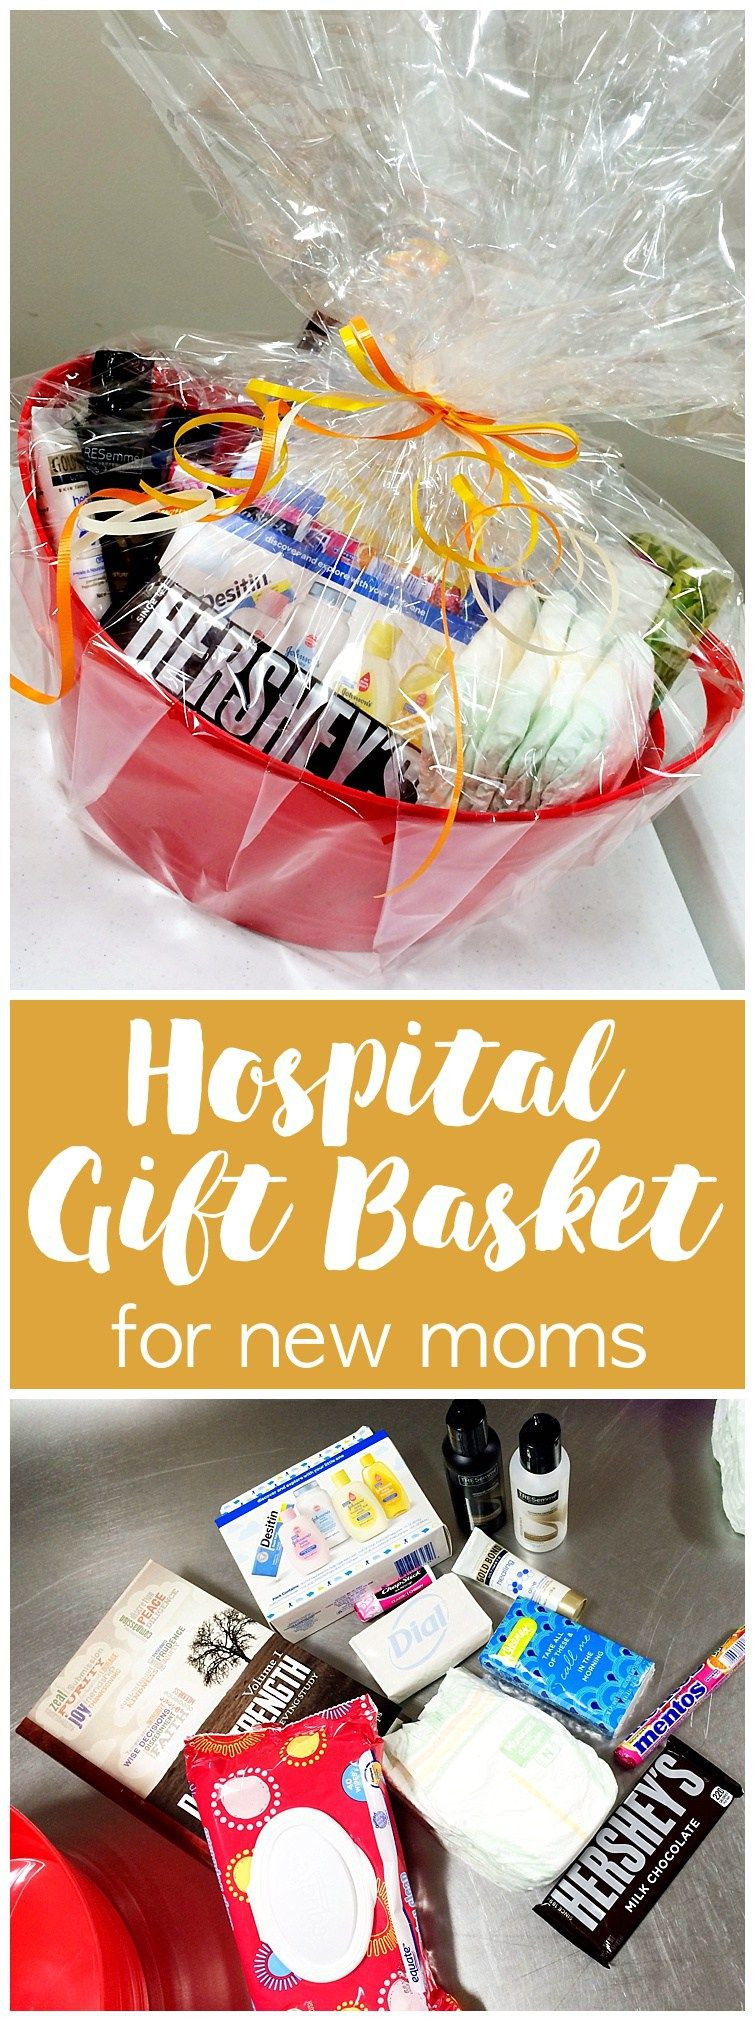 Gift Ideas For Kids In Hospital
 Hospital Gift Basket for a new mom